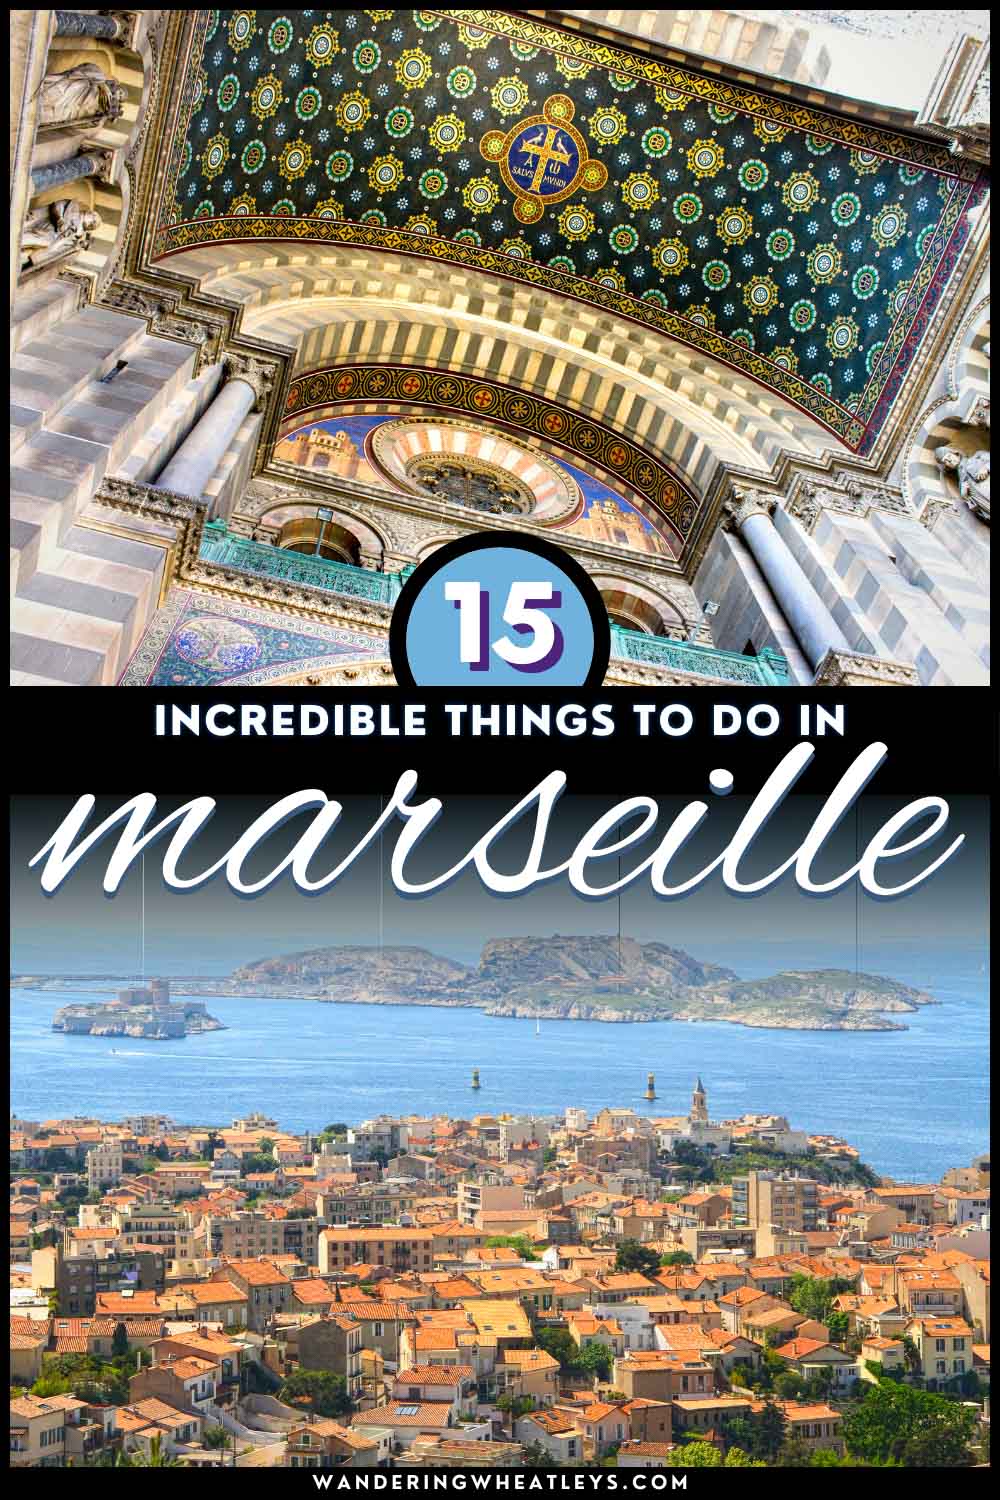 The Best Things to do in Marseille, France